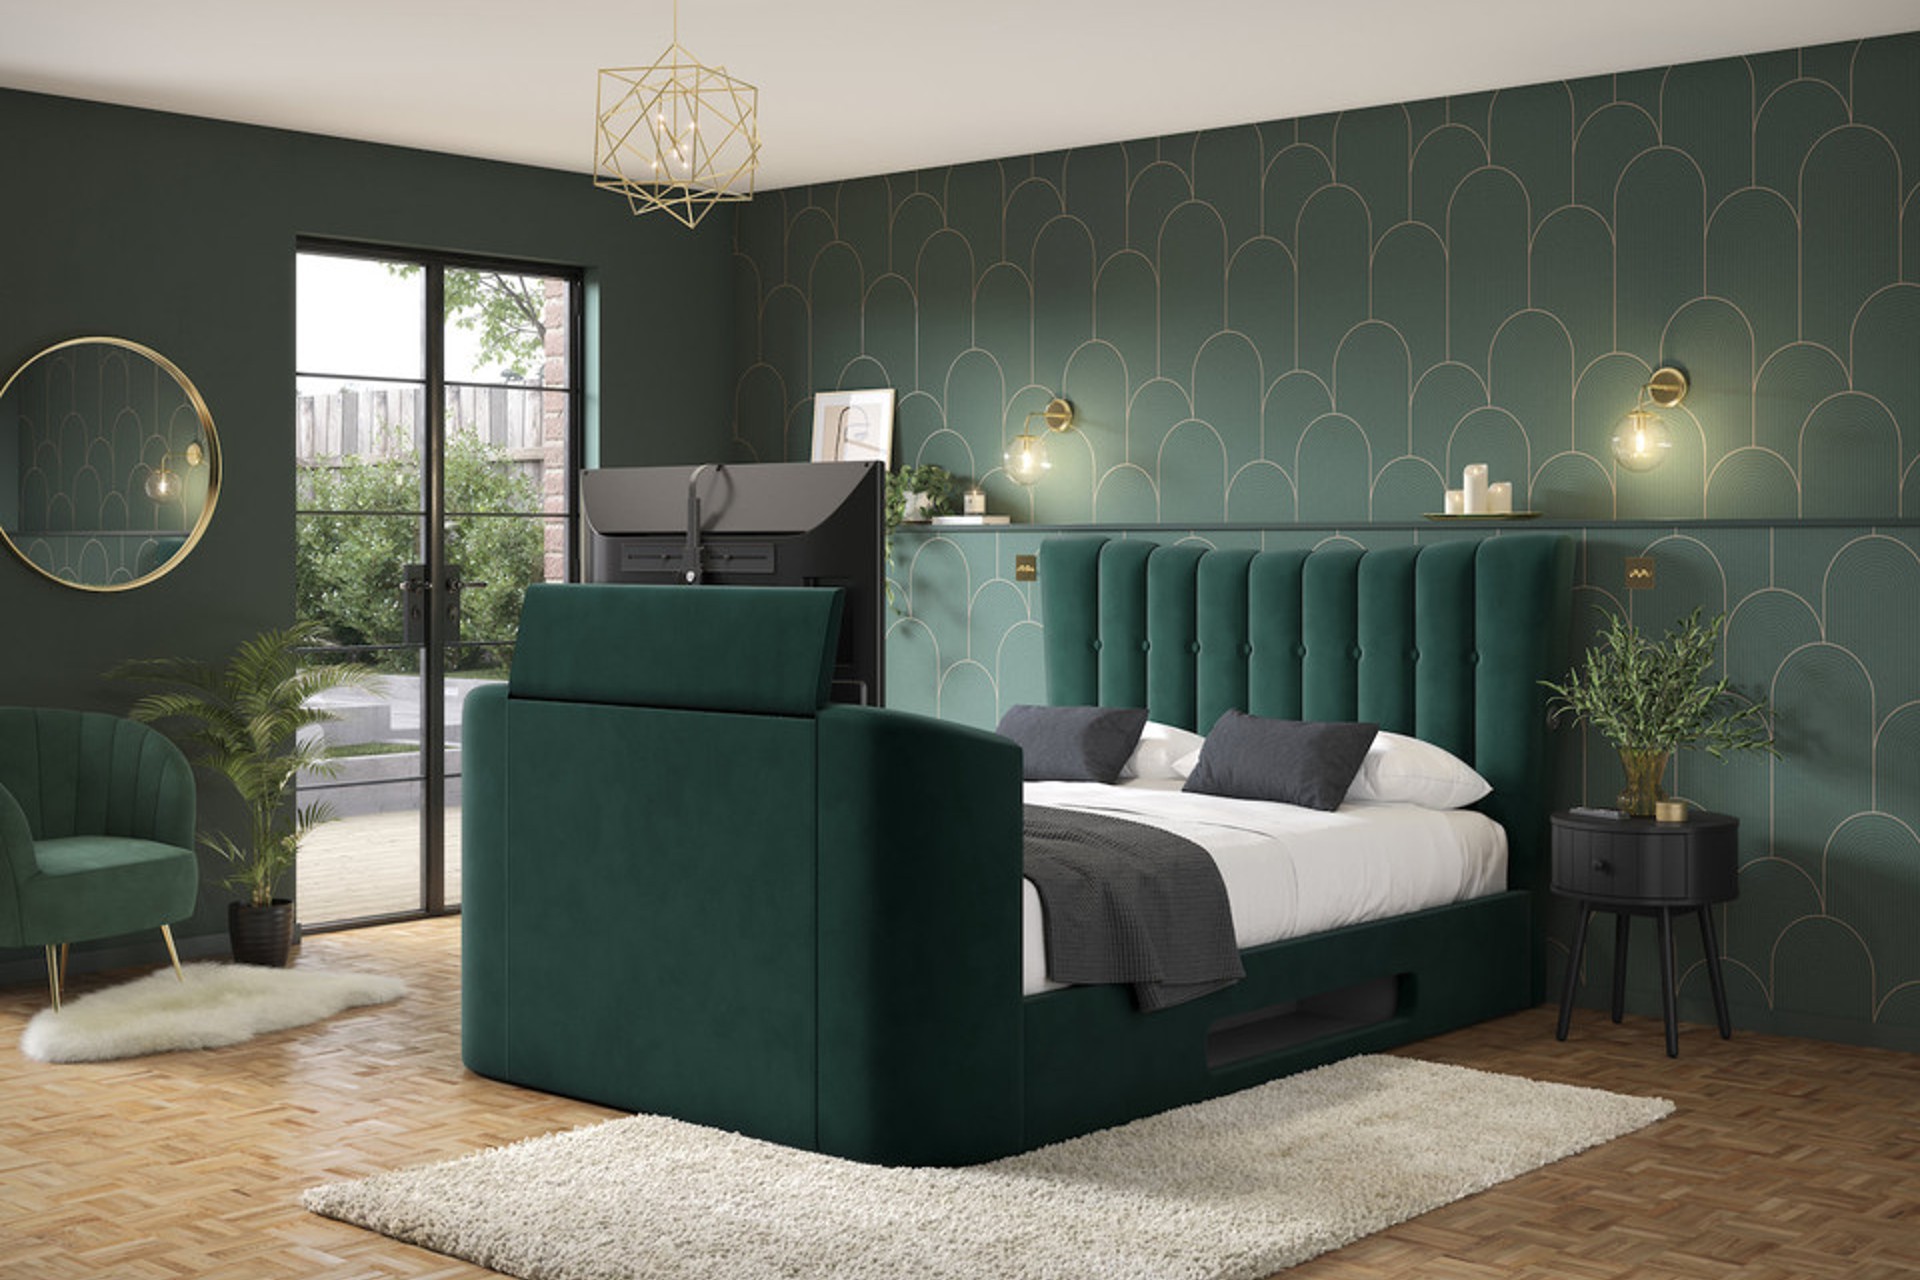 Esther Ottoman TV storage bed frame in emerald green